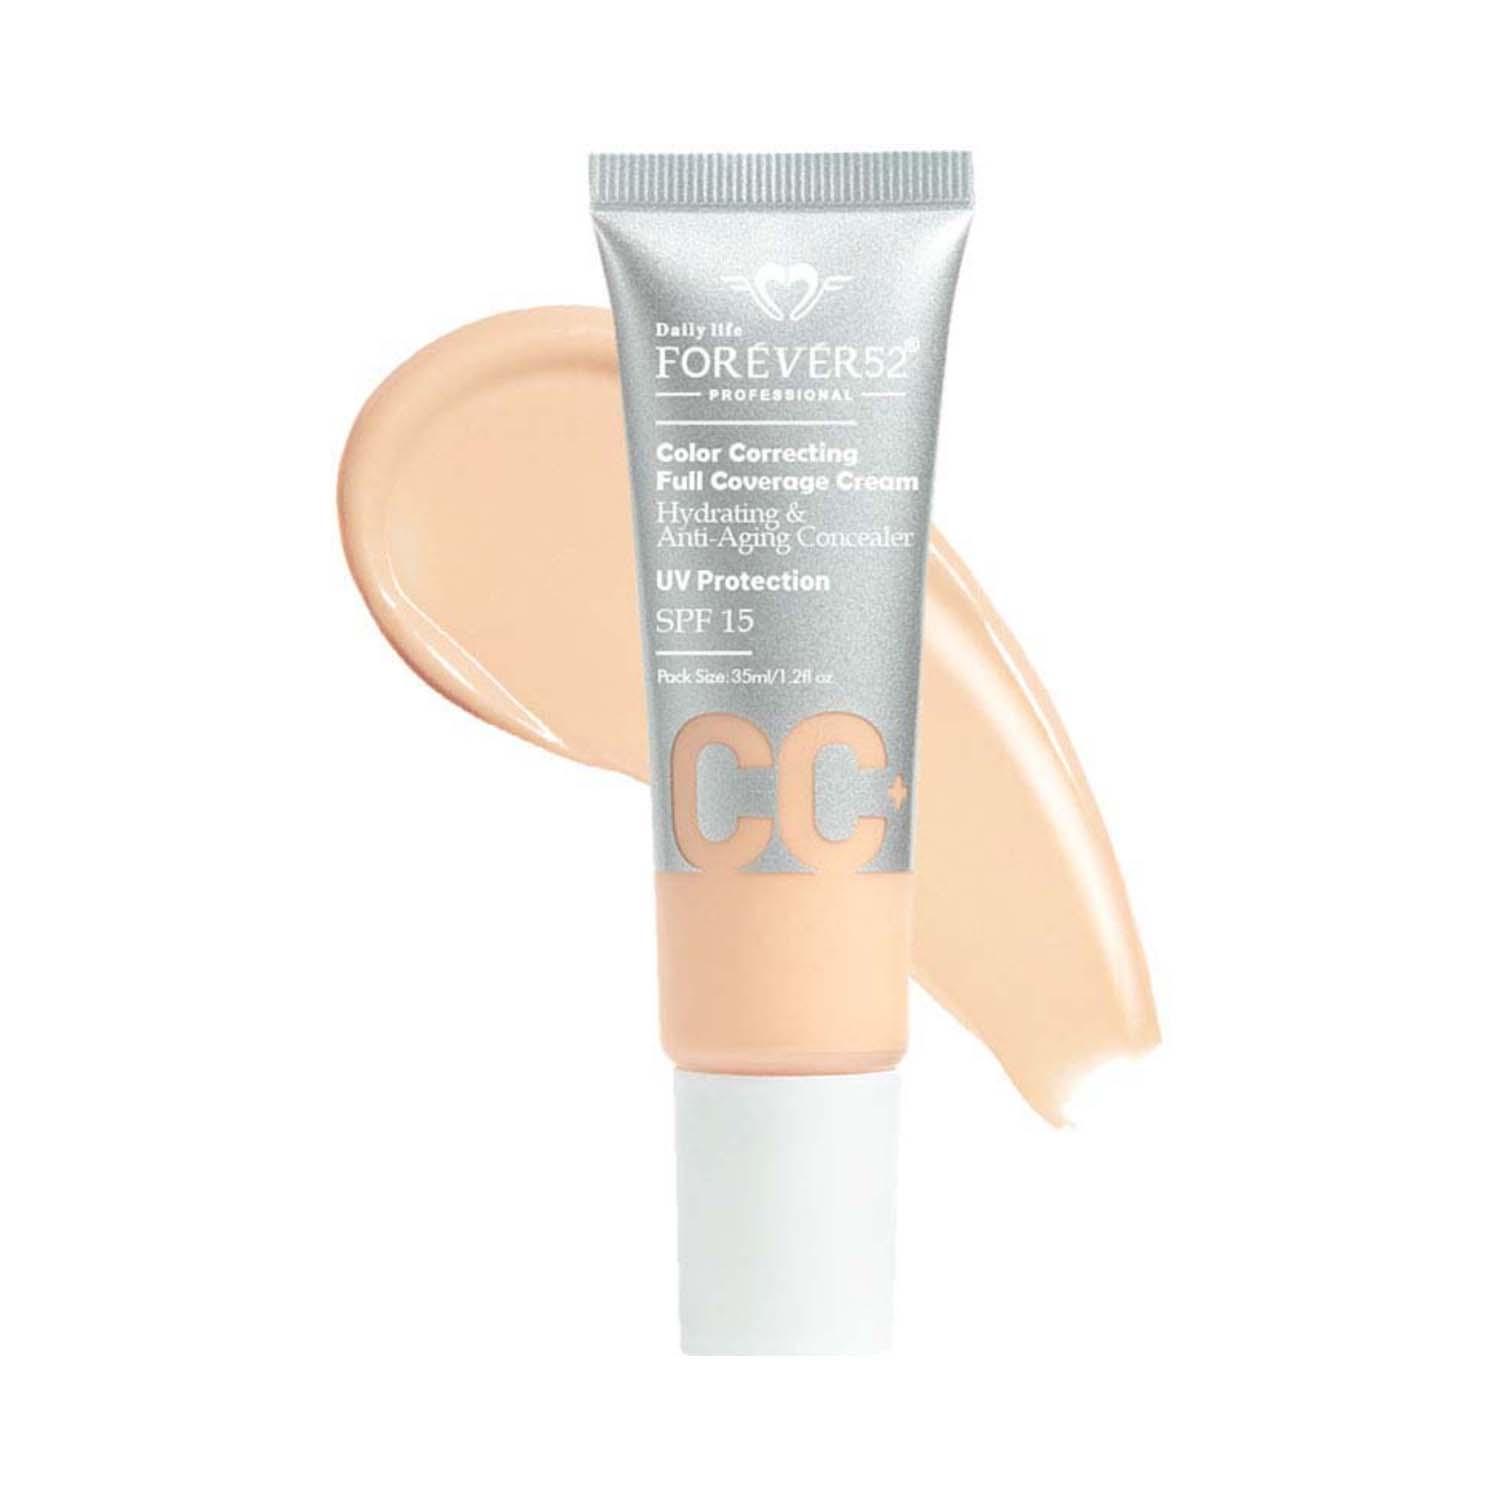 Daily Life Forever52 | Daily Life Forever52 Color Correcting CC Cream With SPF 15 - 001 Blonde (35 ml)